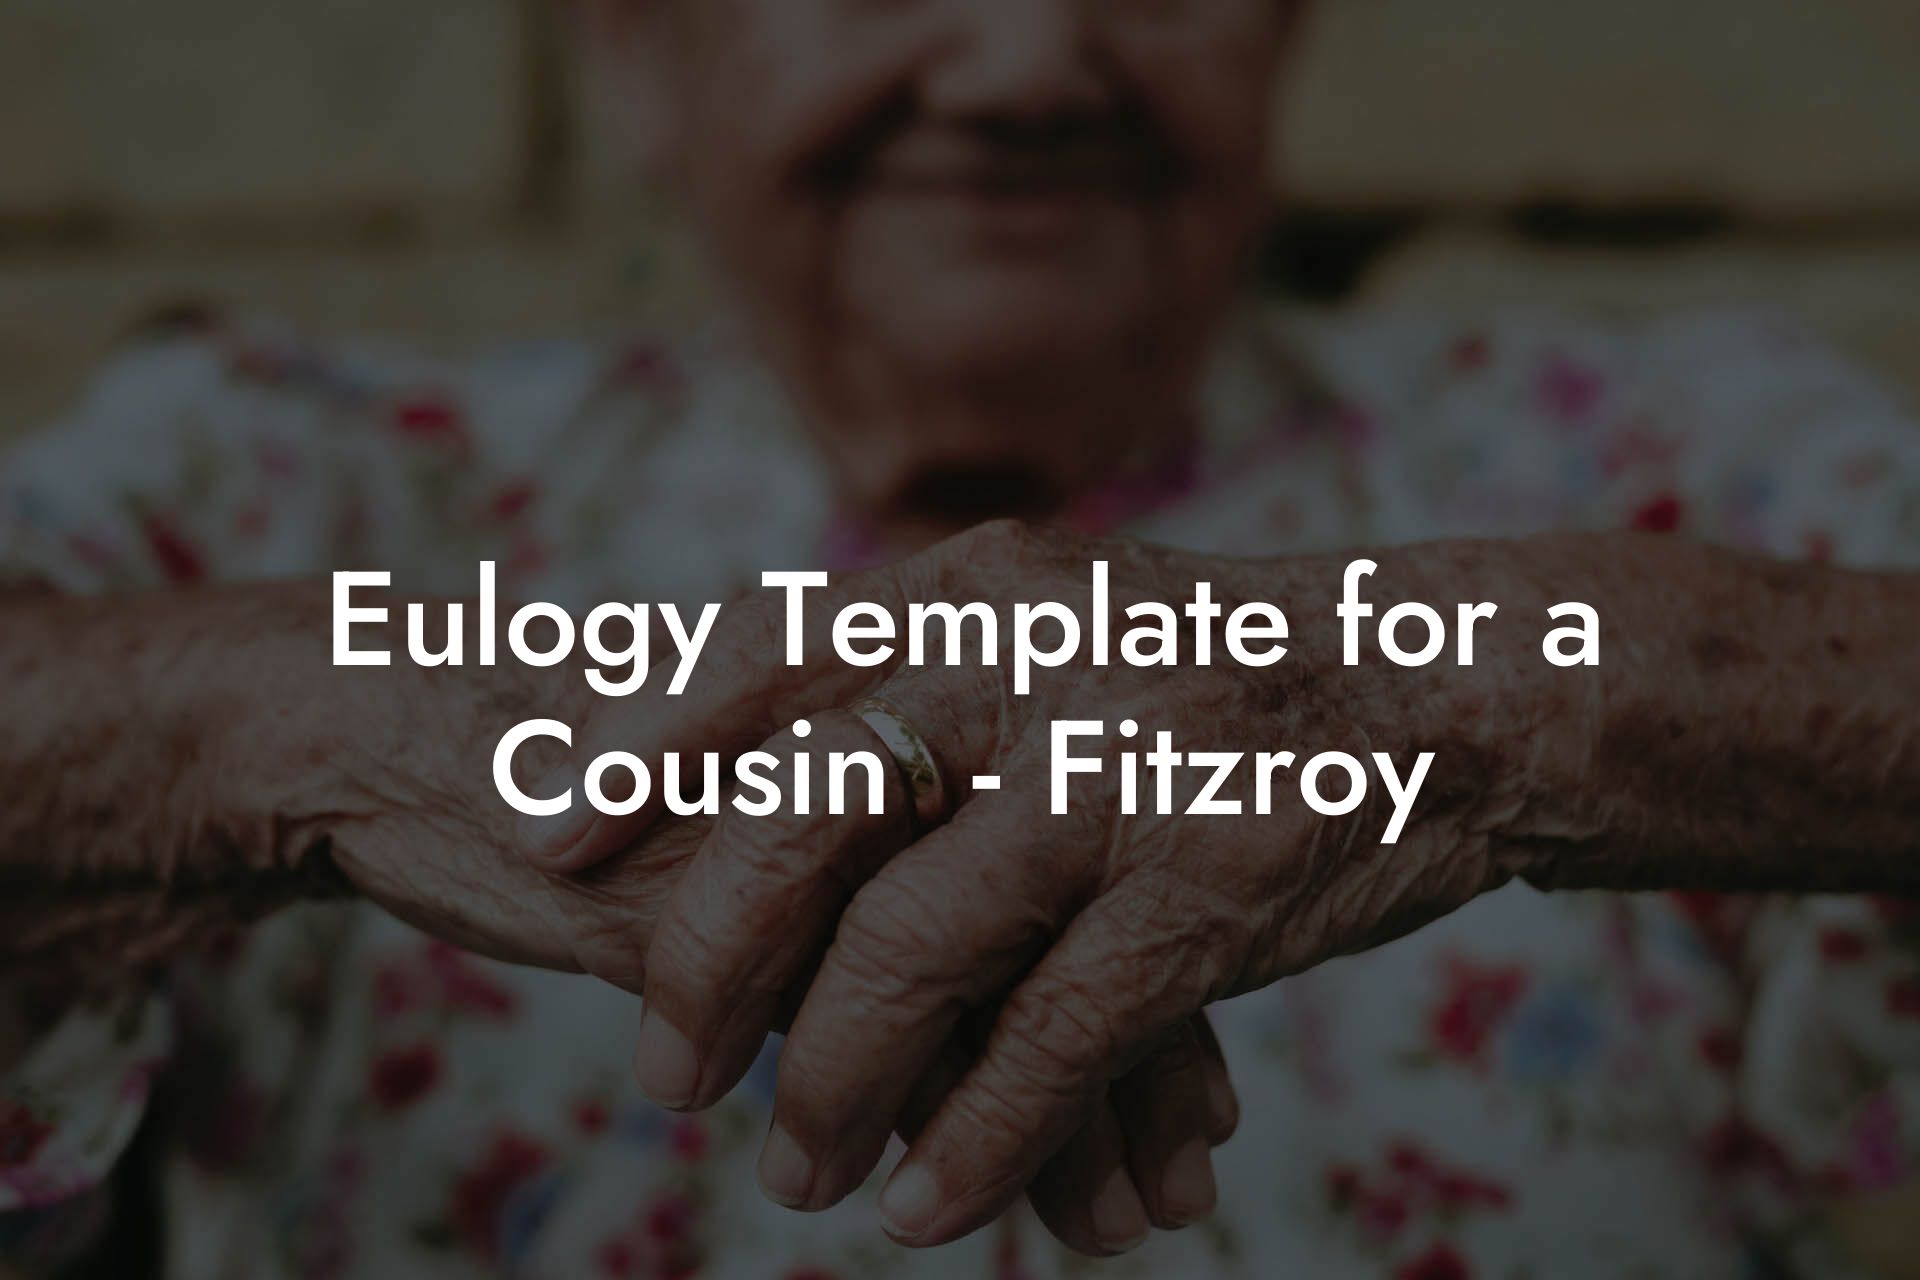 Eulogy Template for a Cousin  - Fitzroy